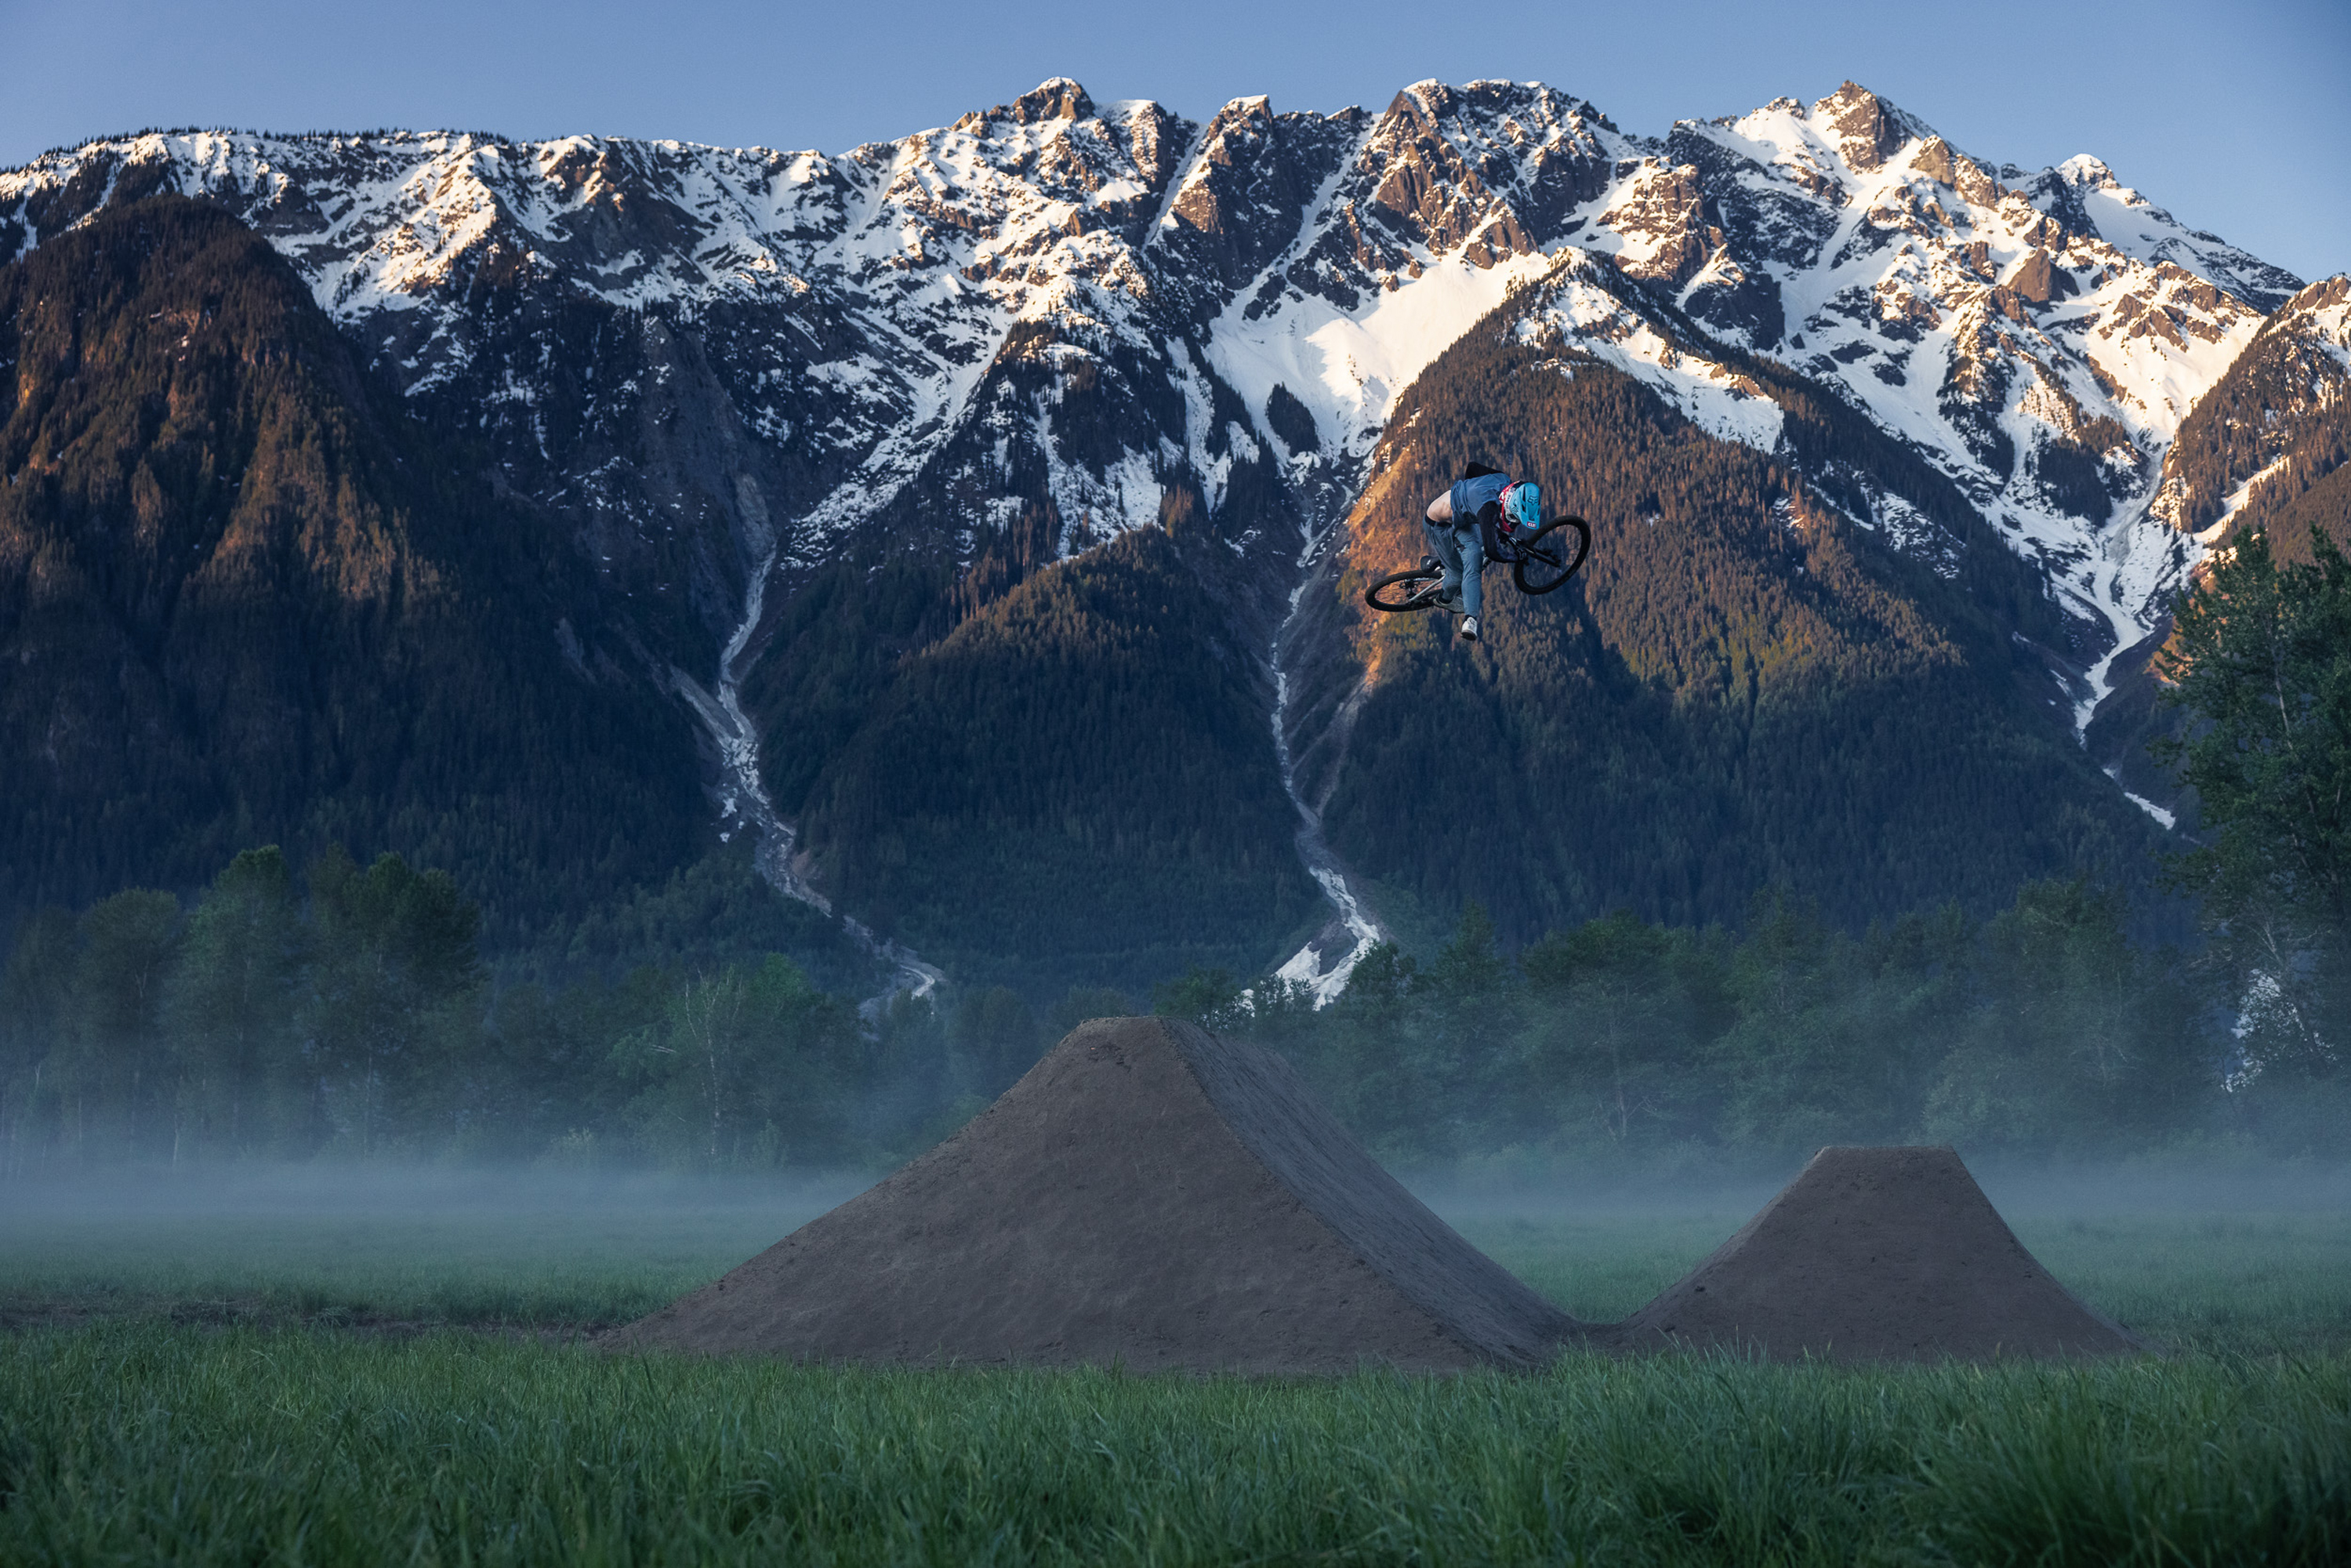 Snow capped mountains and dirt jumps